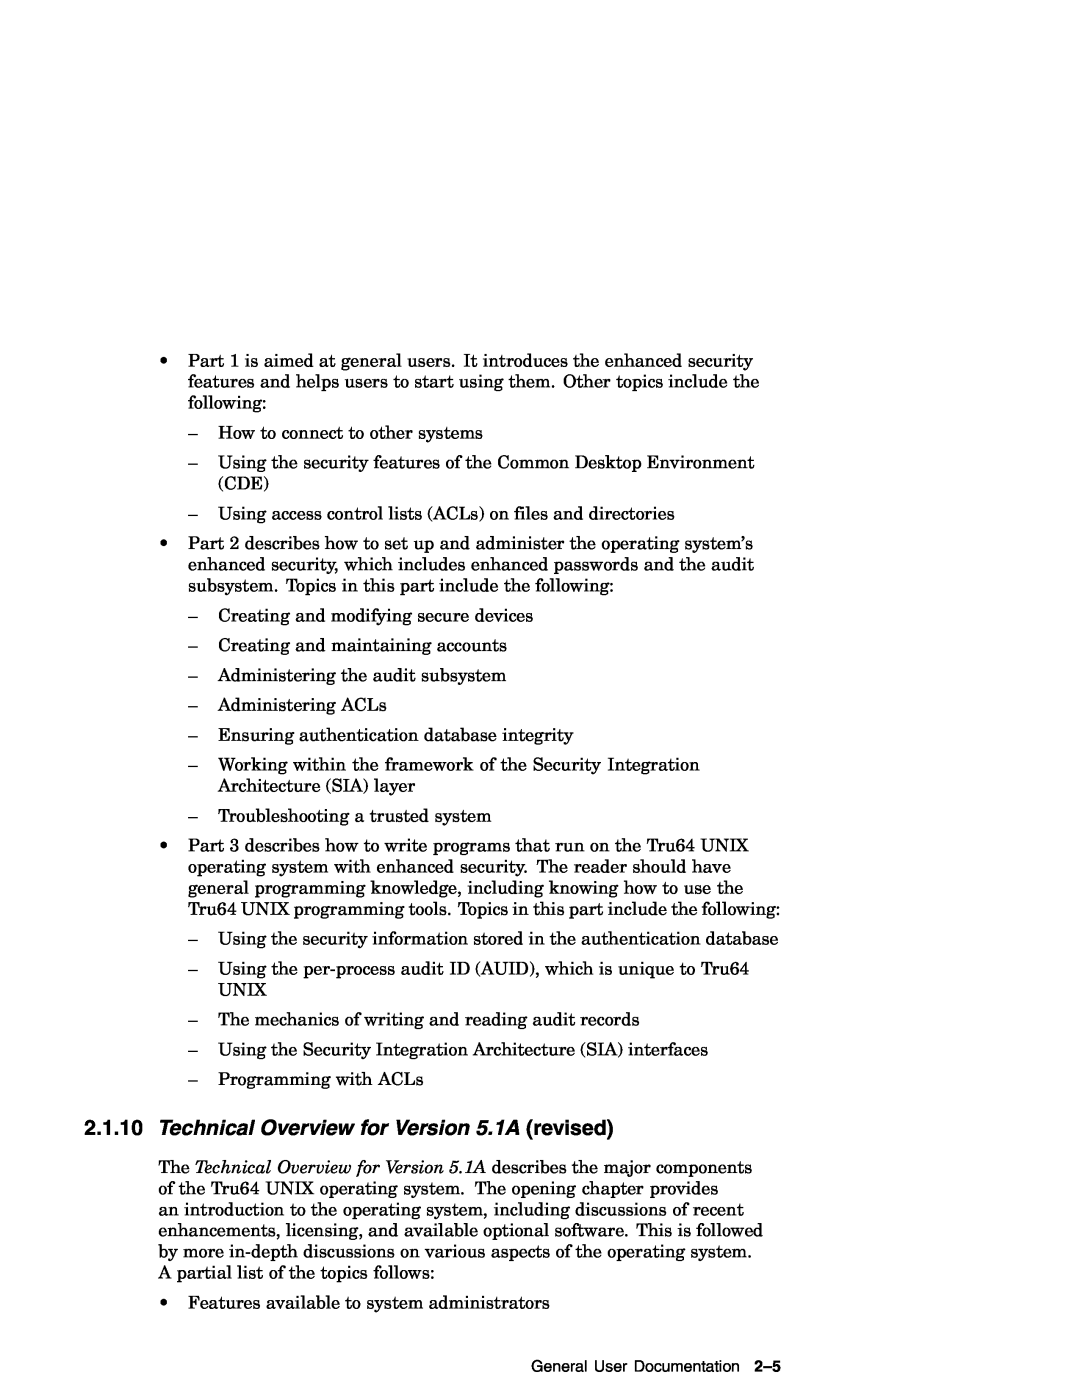 Compaq AA-RH8RD-TE manual Technical Overview for Version 5.1A revised 